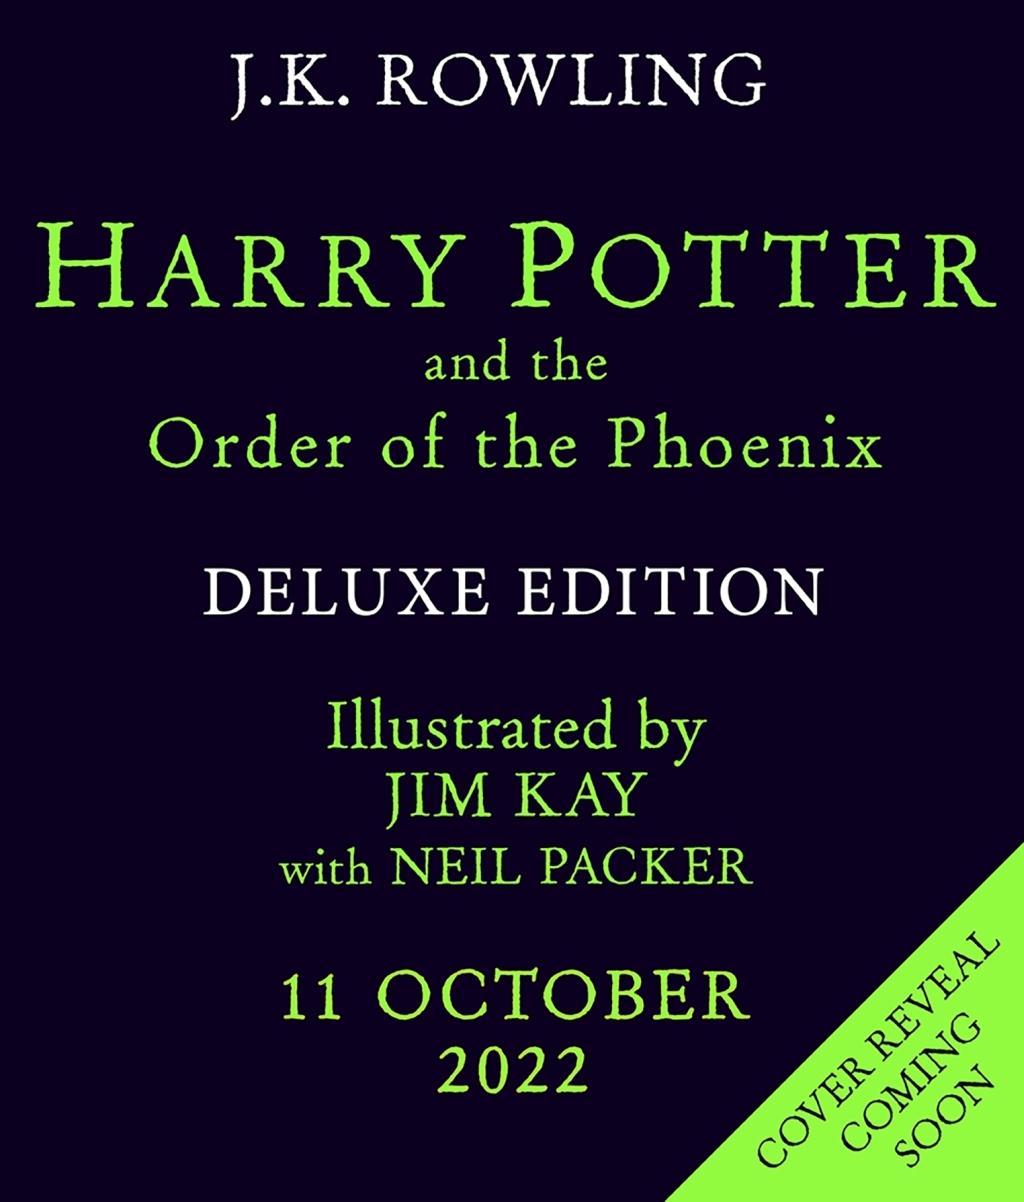 Harry Potter and the Order of the Phoenix: J.K. Rowling & Jim Kay